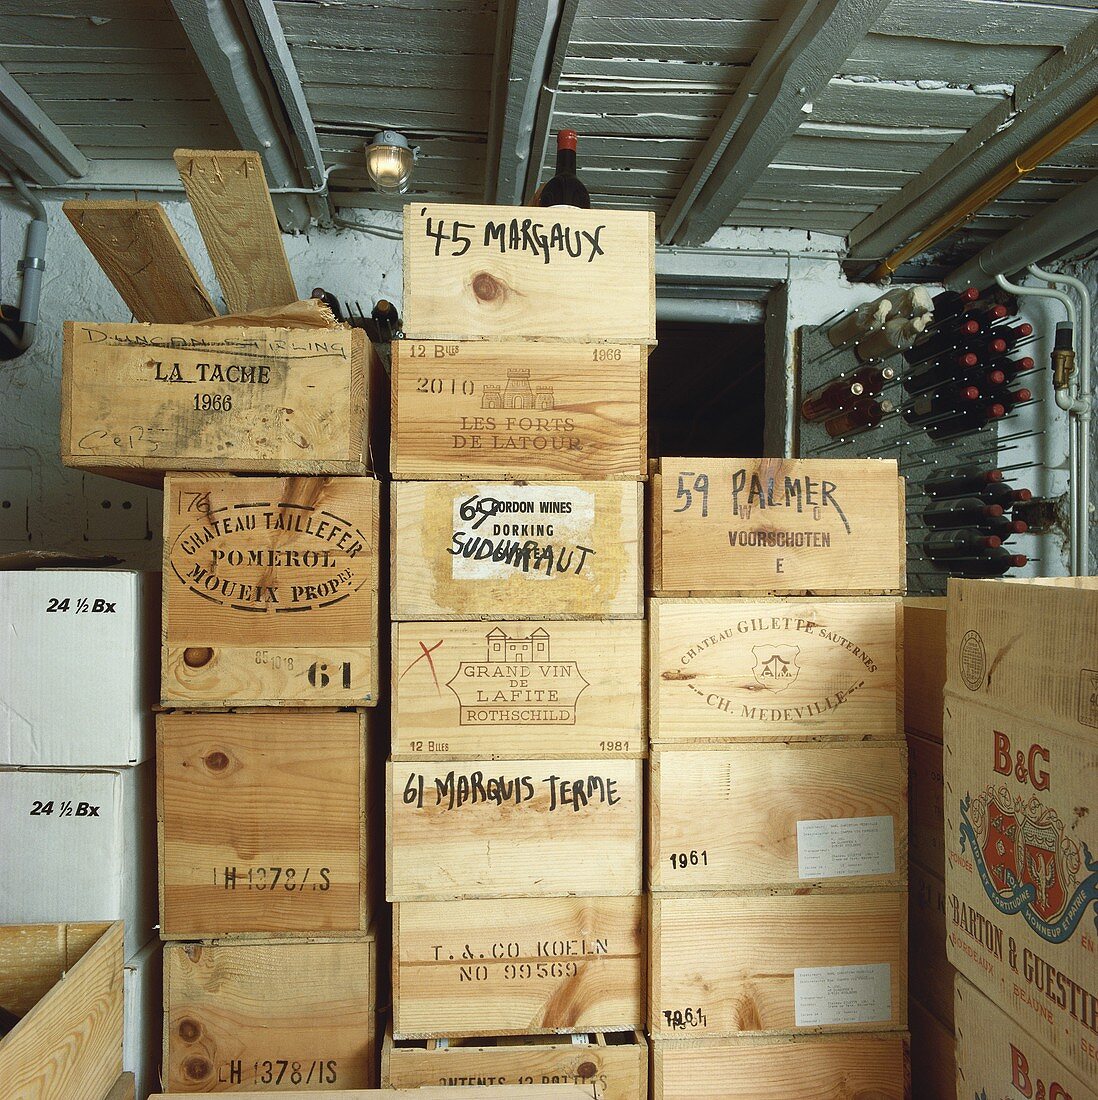 Several crates of wine in a wine cellar